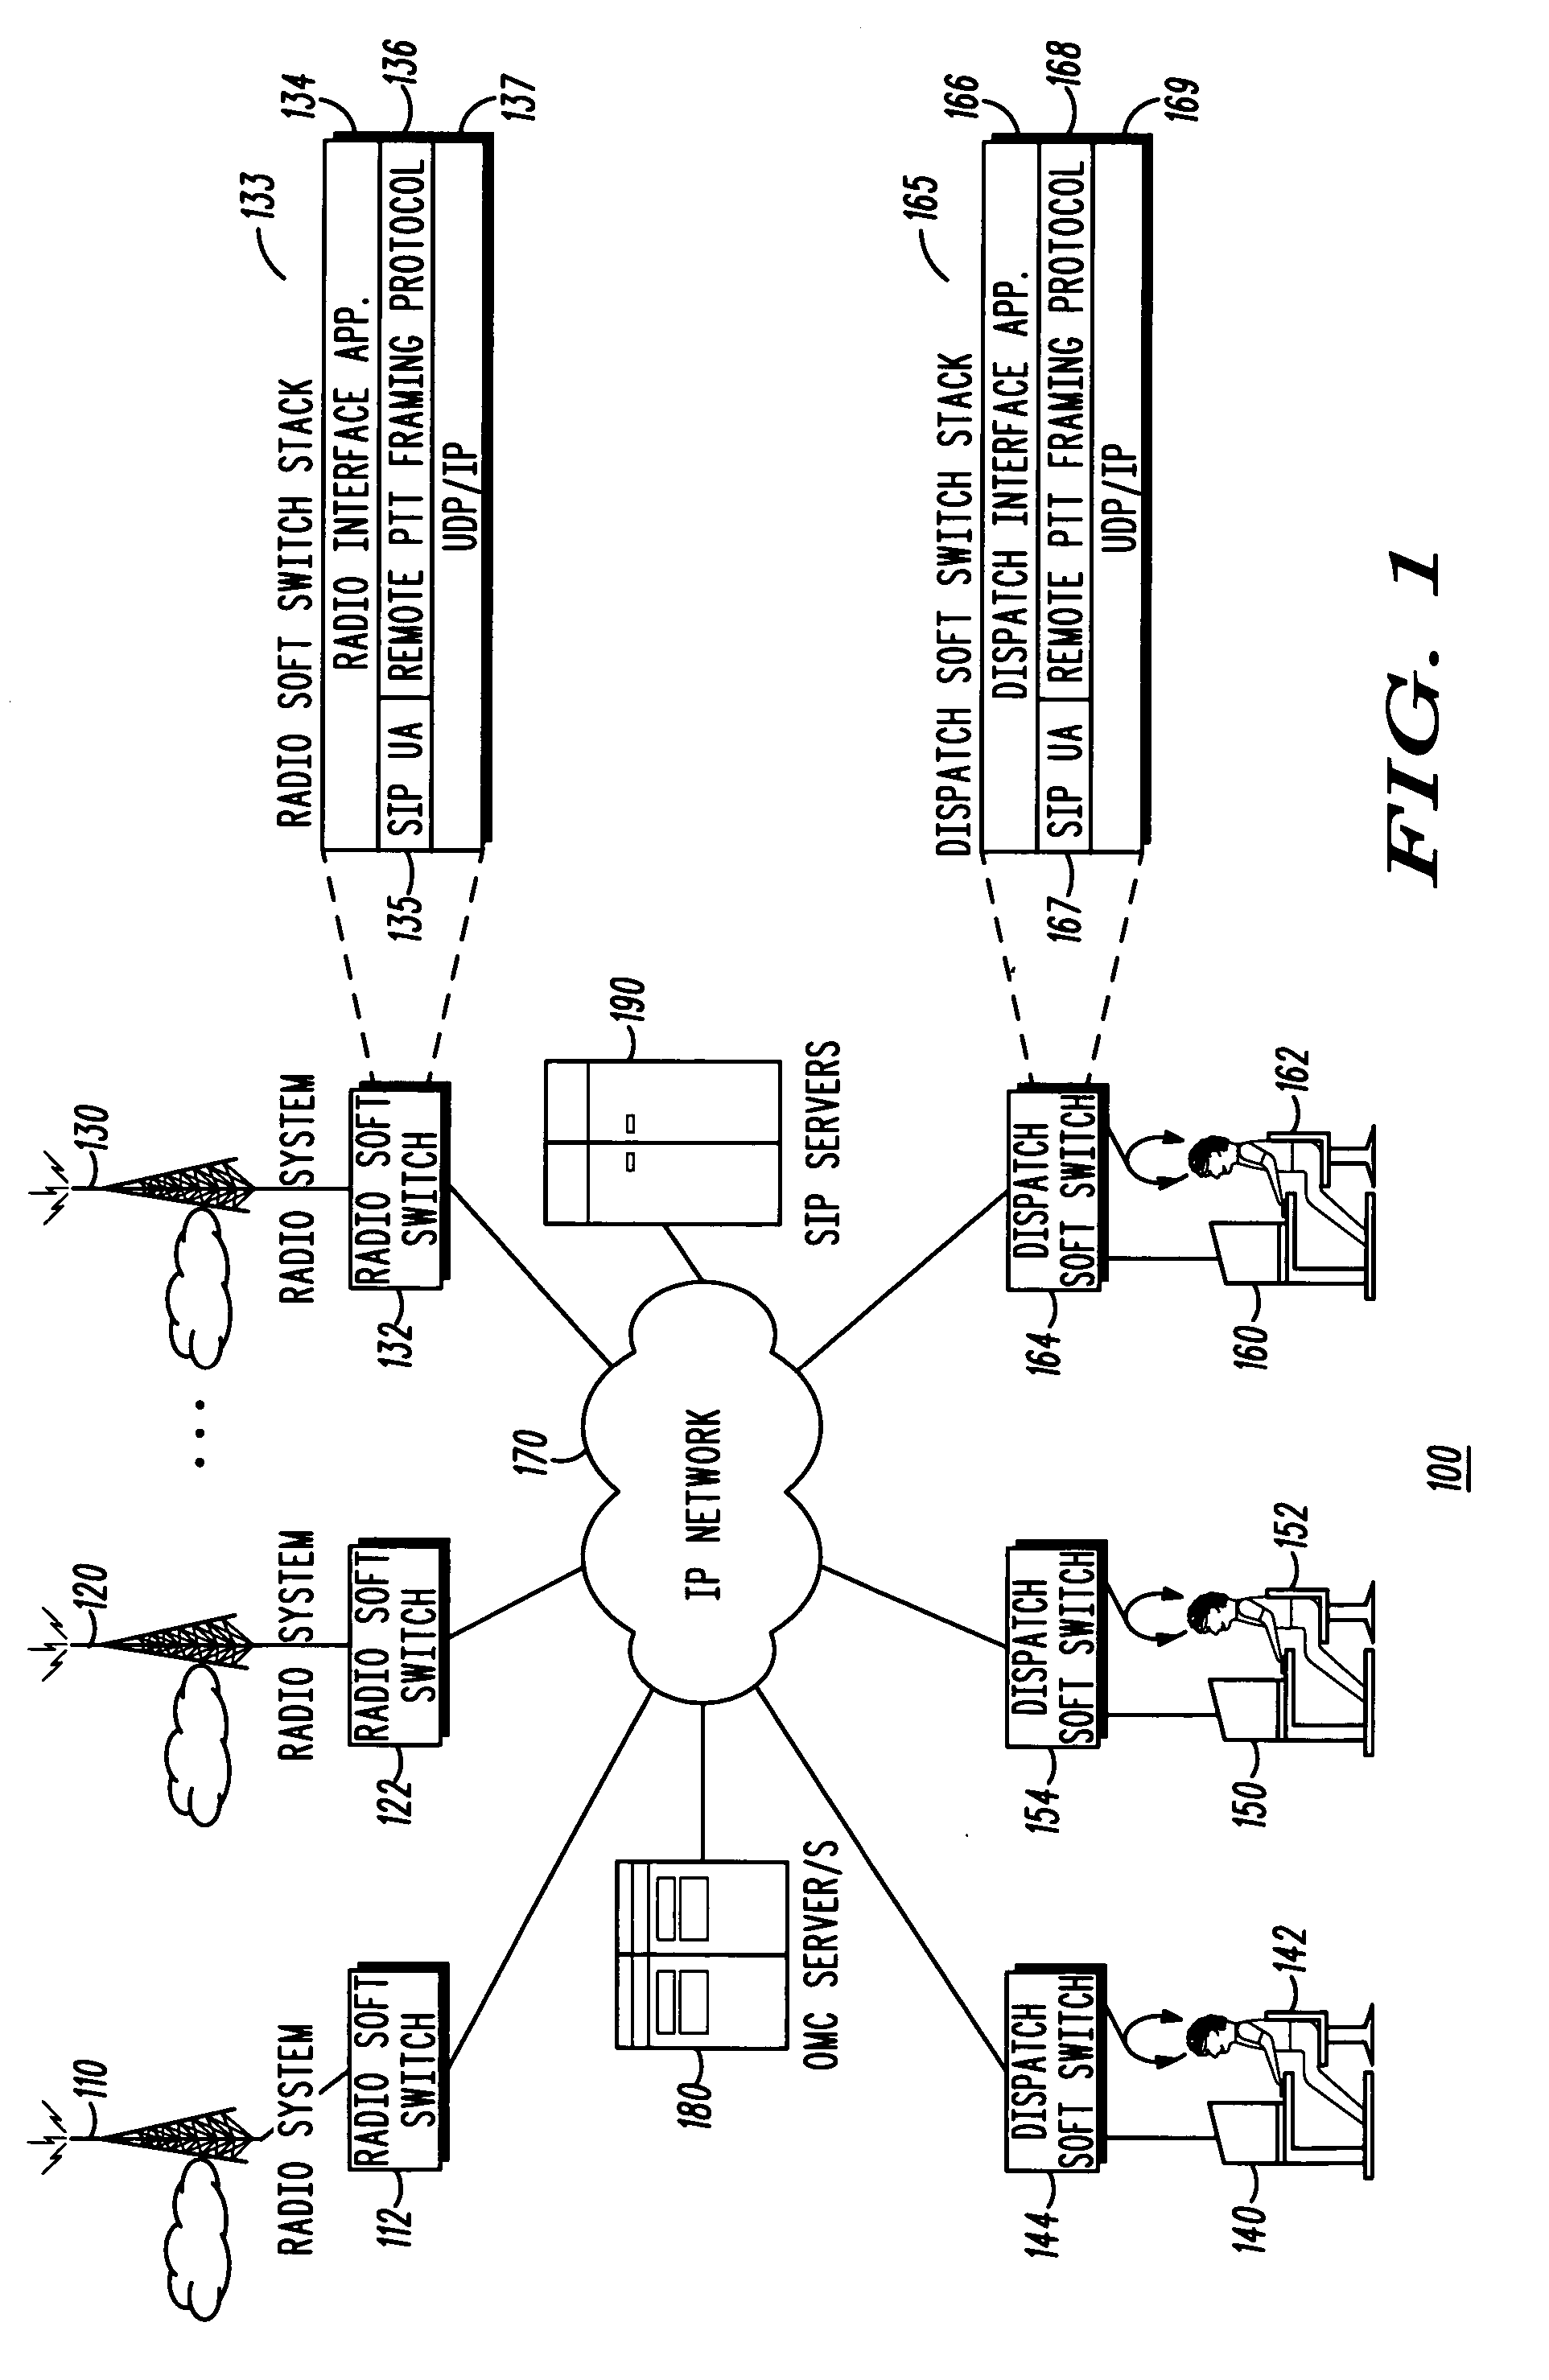 Method and apparatus for enabling interoperability between packet-switched systems